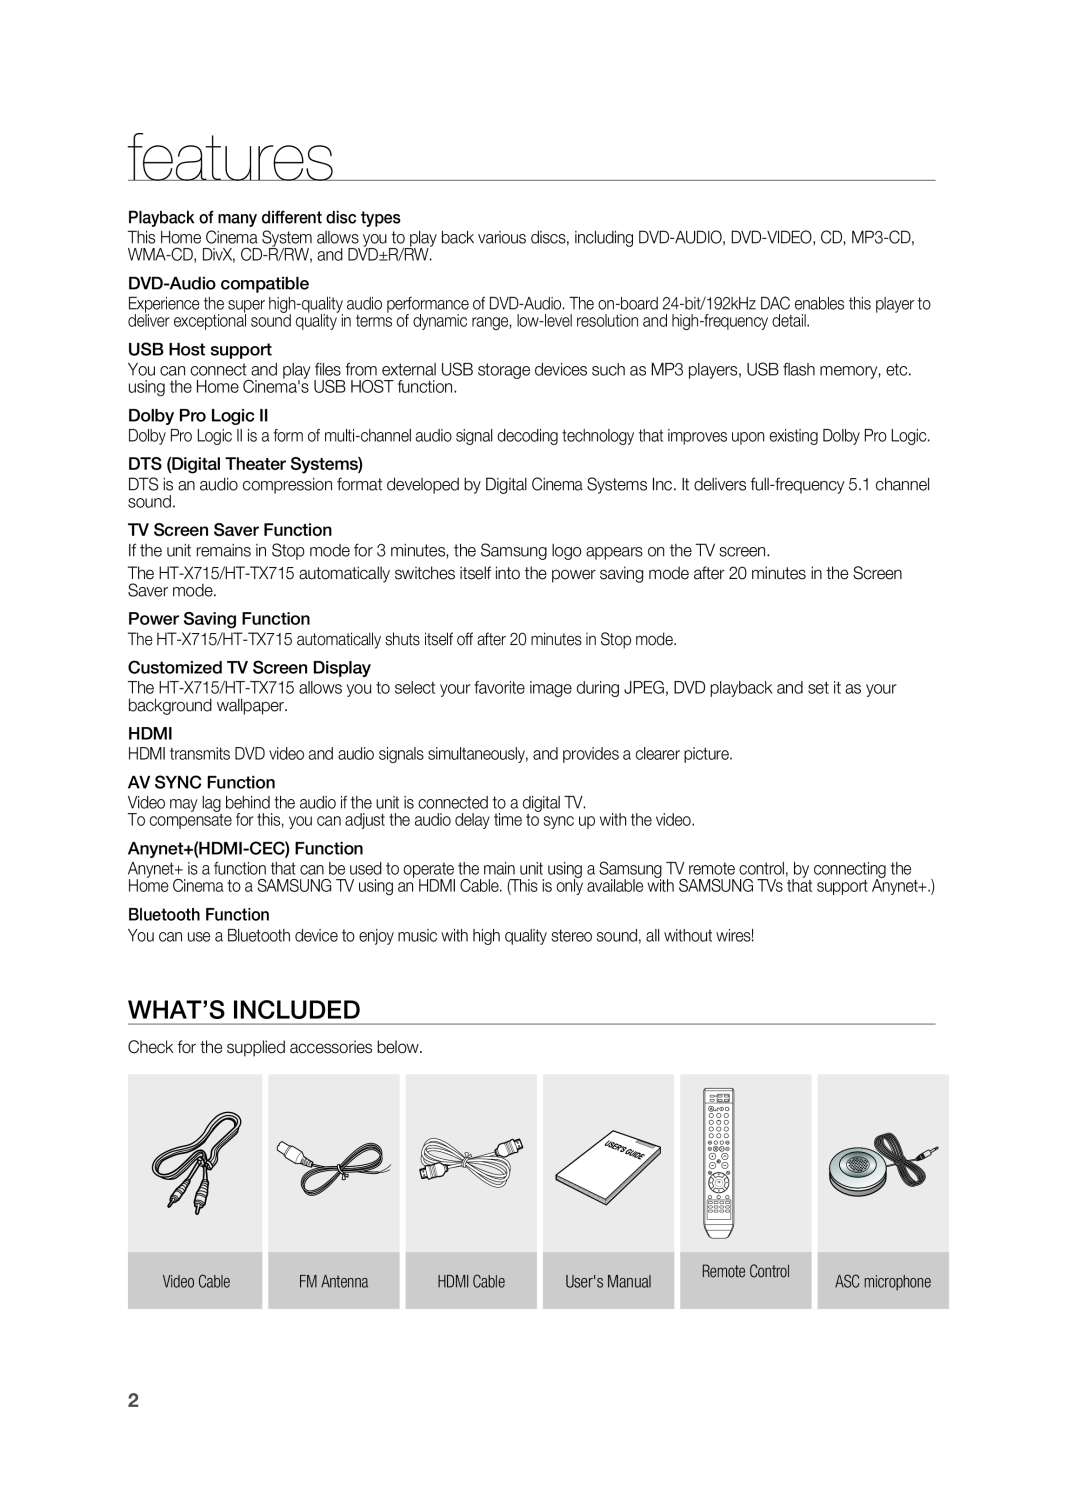 Samsung HT-TX715 user manual features, What’s included 